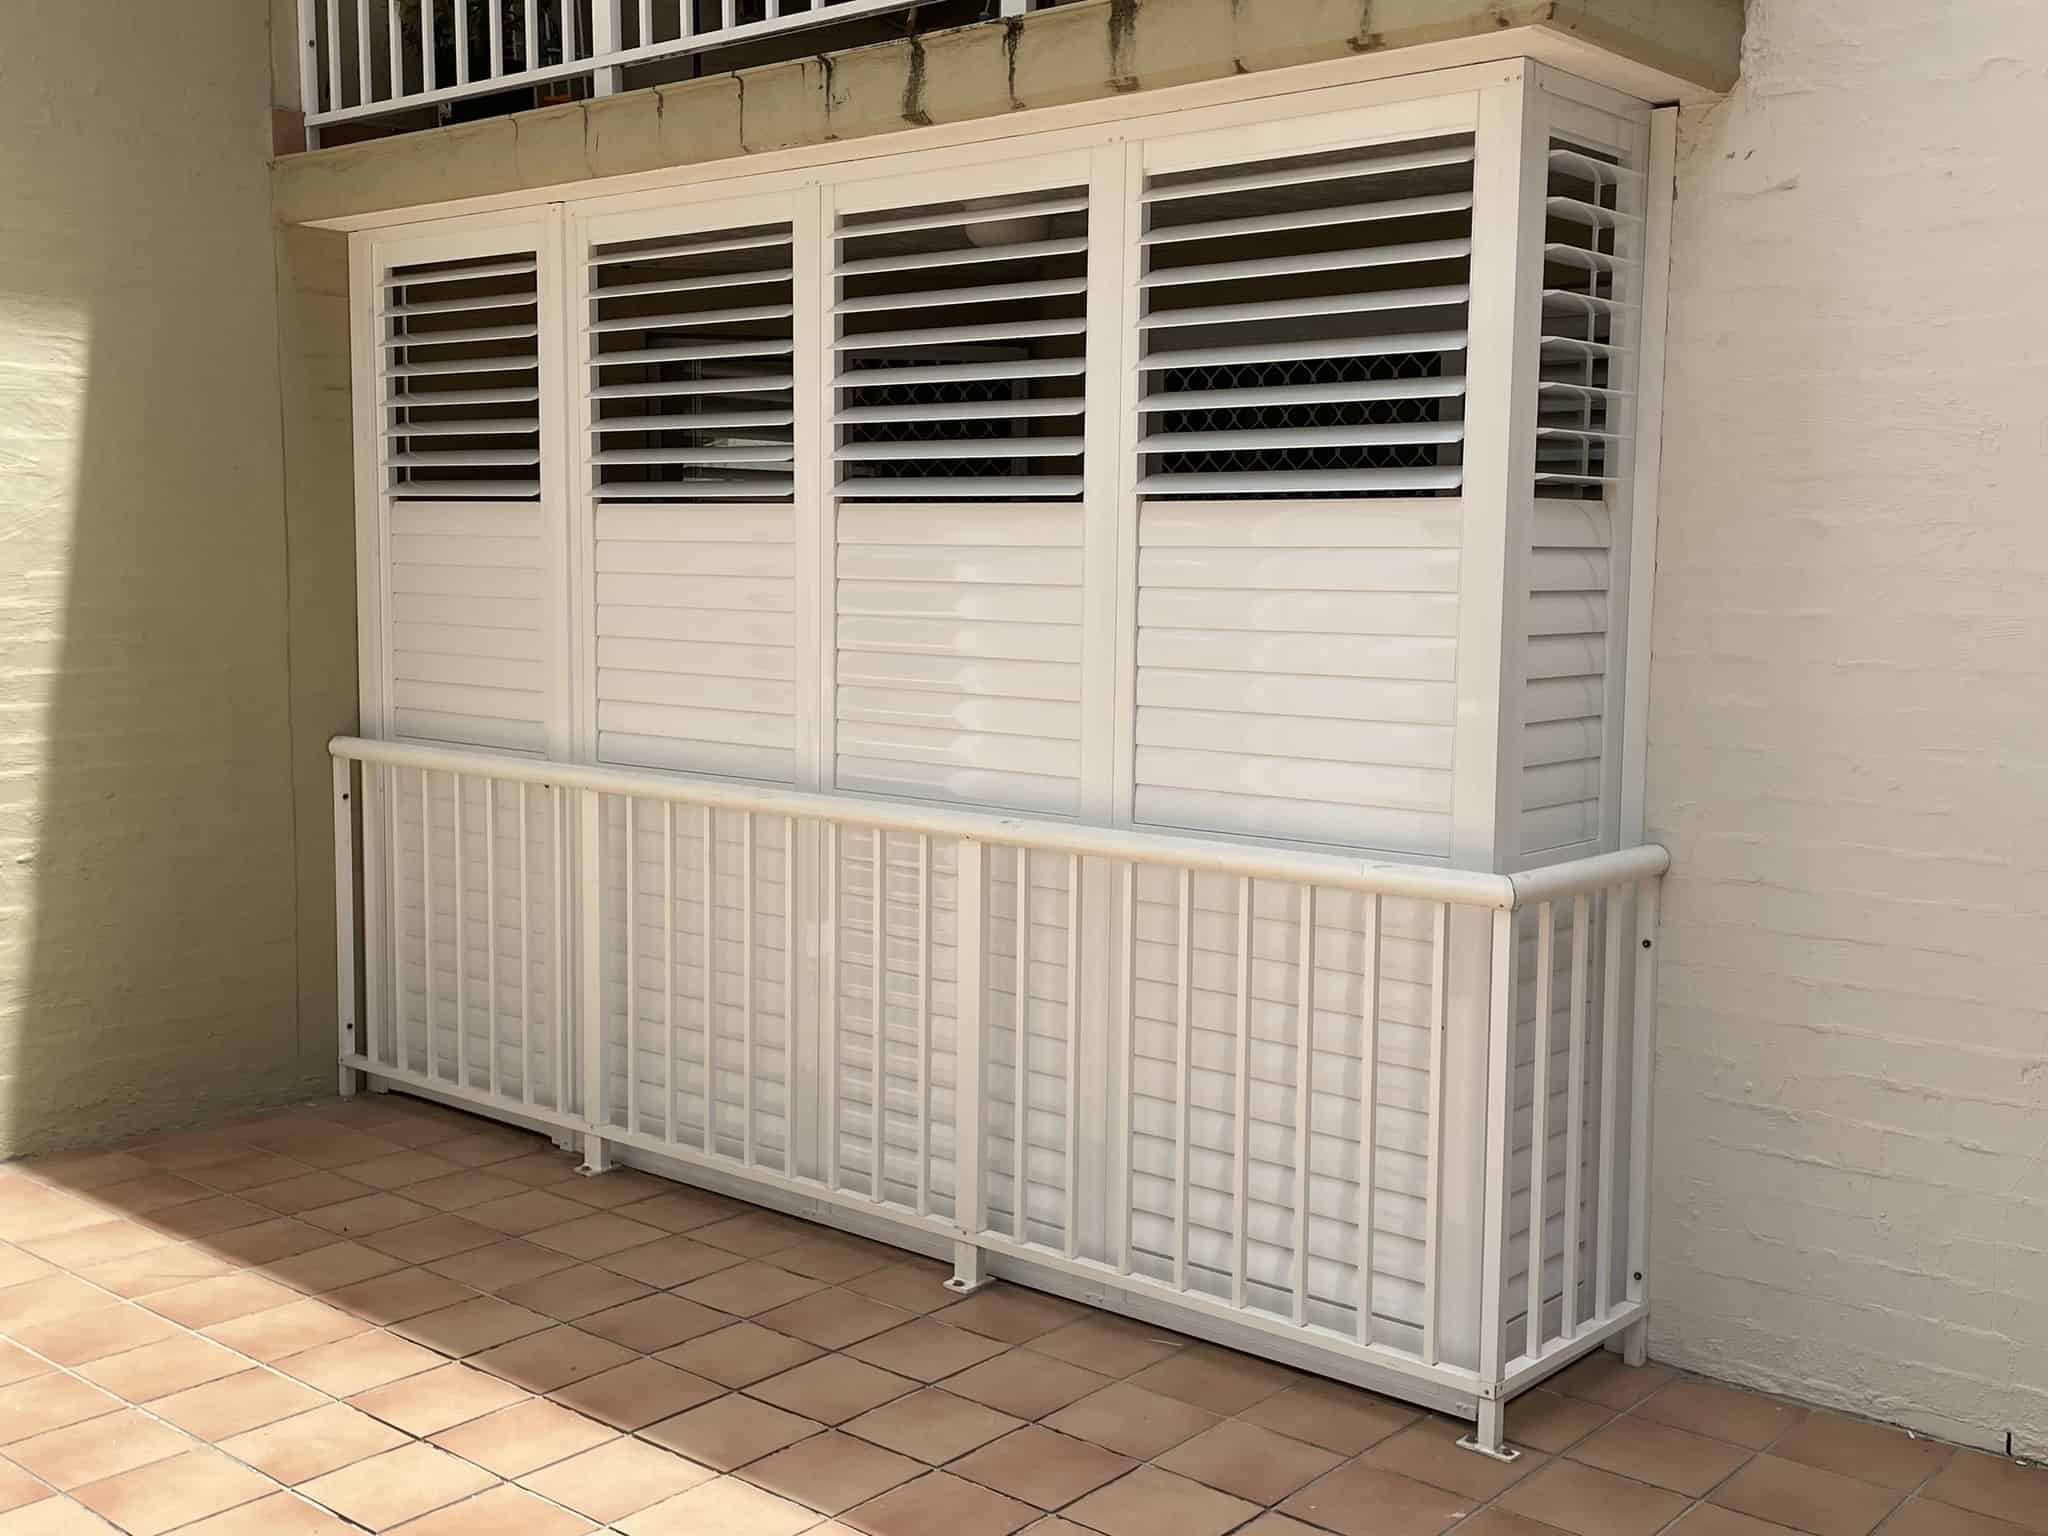 transform-your-outdoor-oasis-with-aluminum-shutters-featured-image